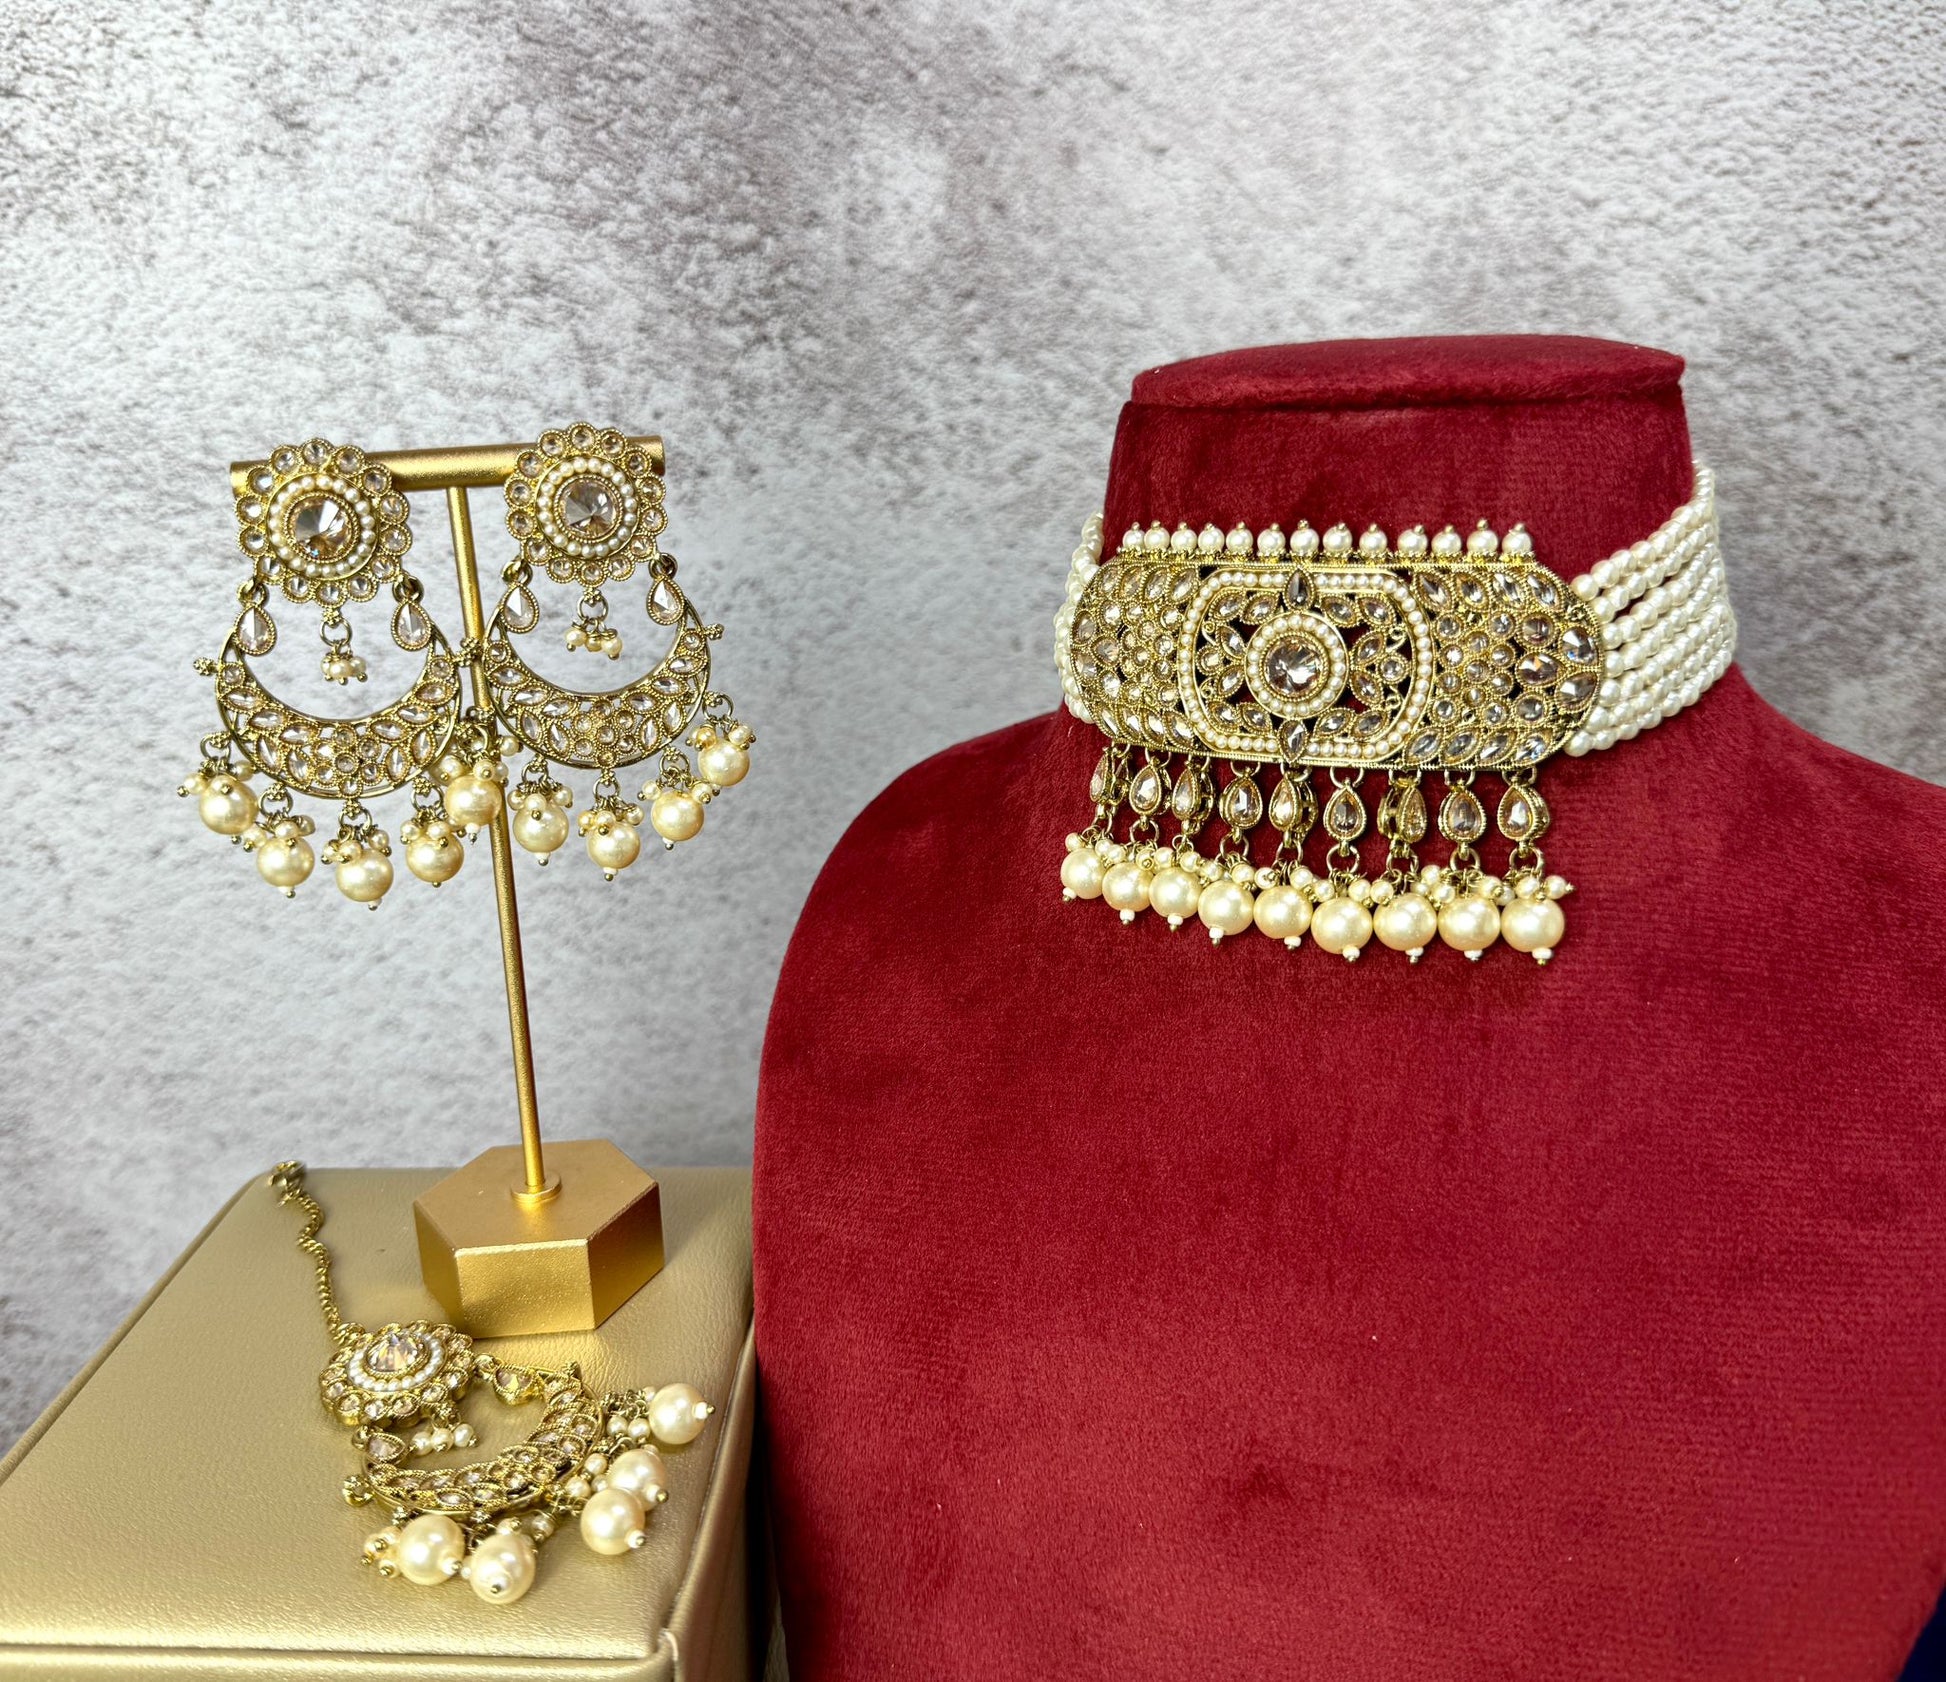 Sophisticated pearl and gold jewelry set